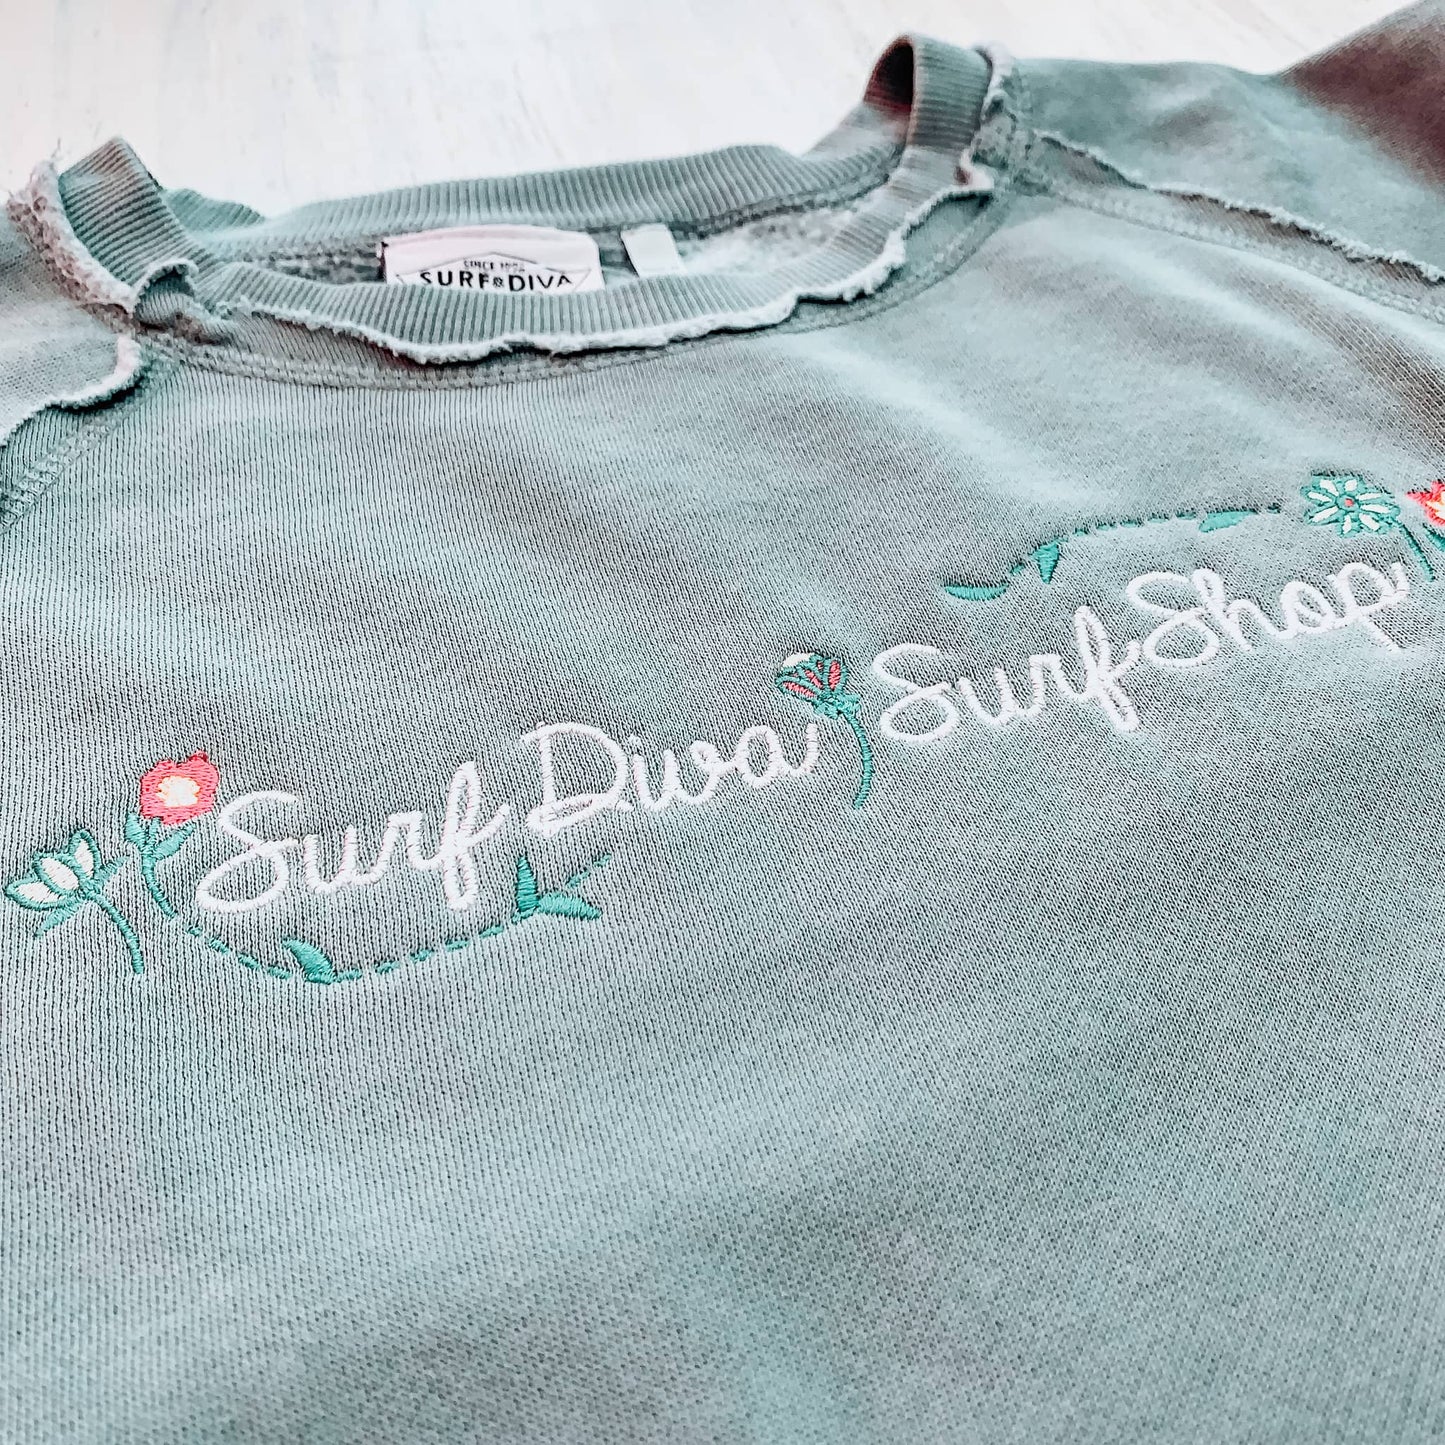 Surf Diva Surf Shop Flowerpoint Embroidery - CREW NECK PULLOVER